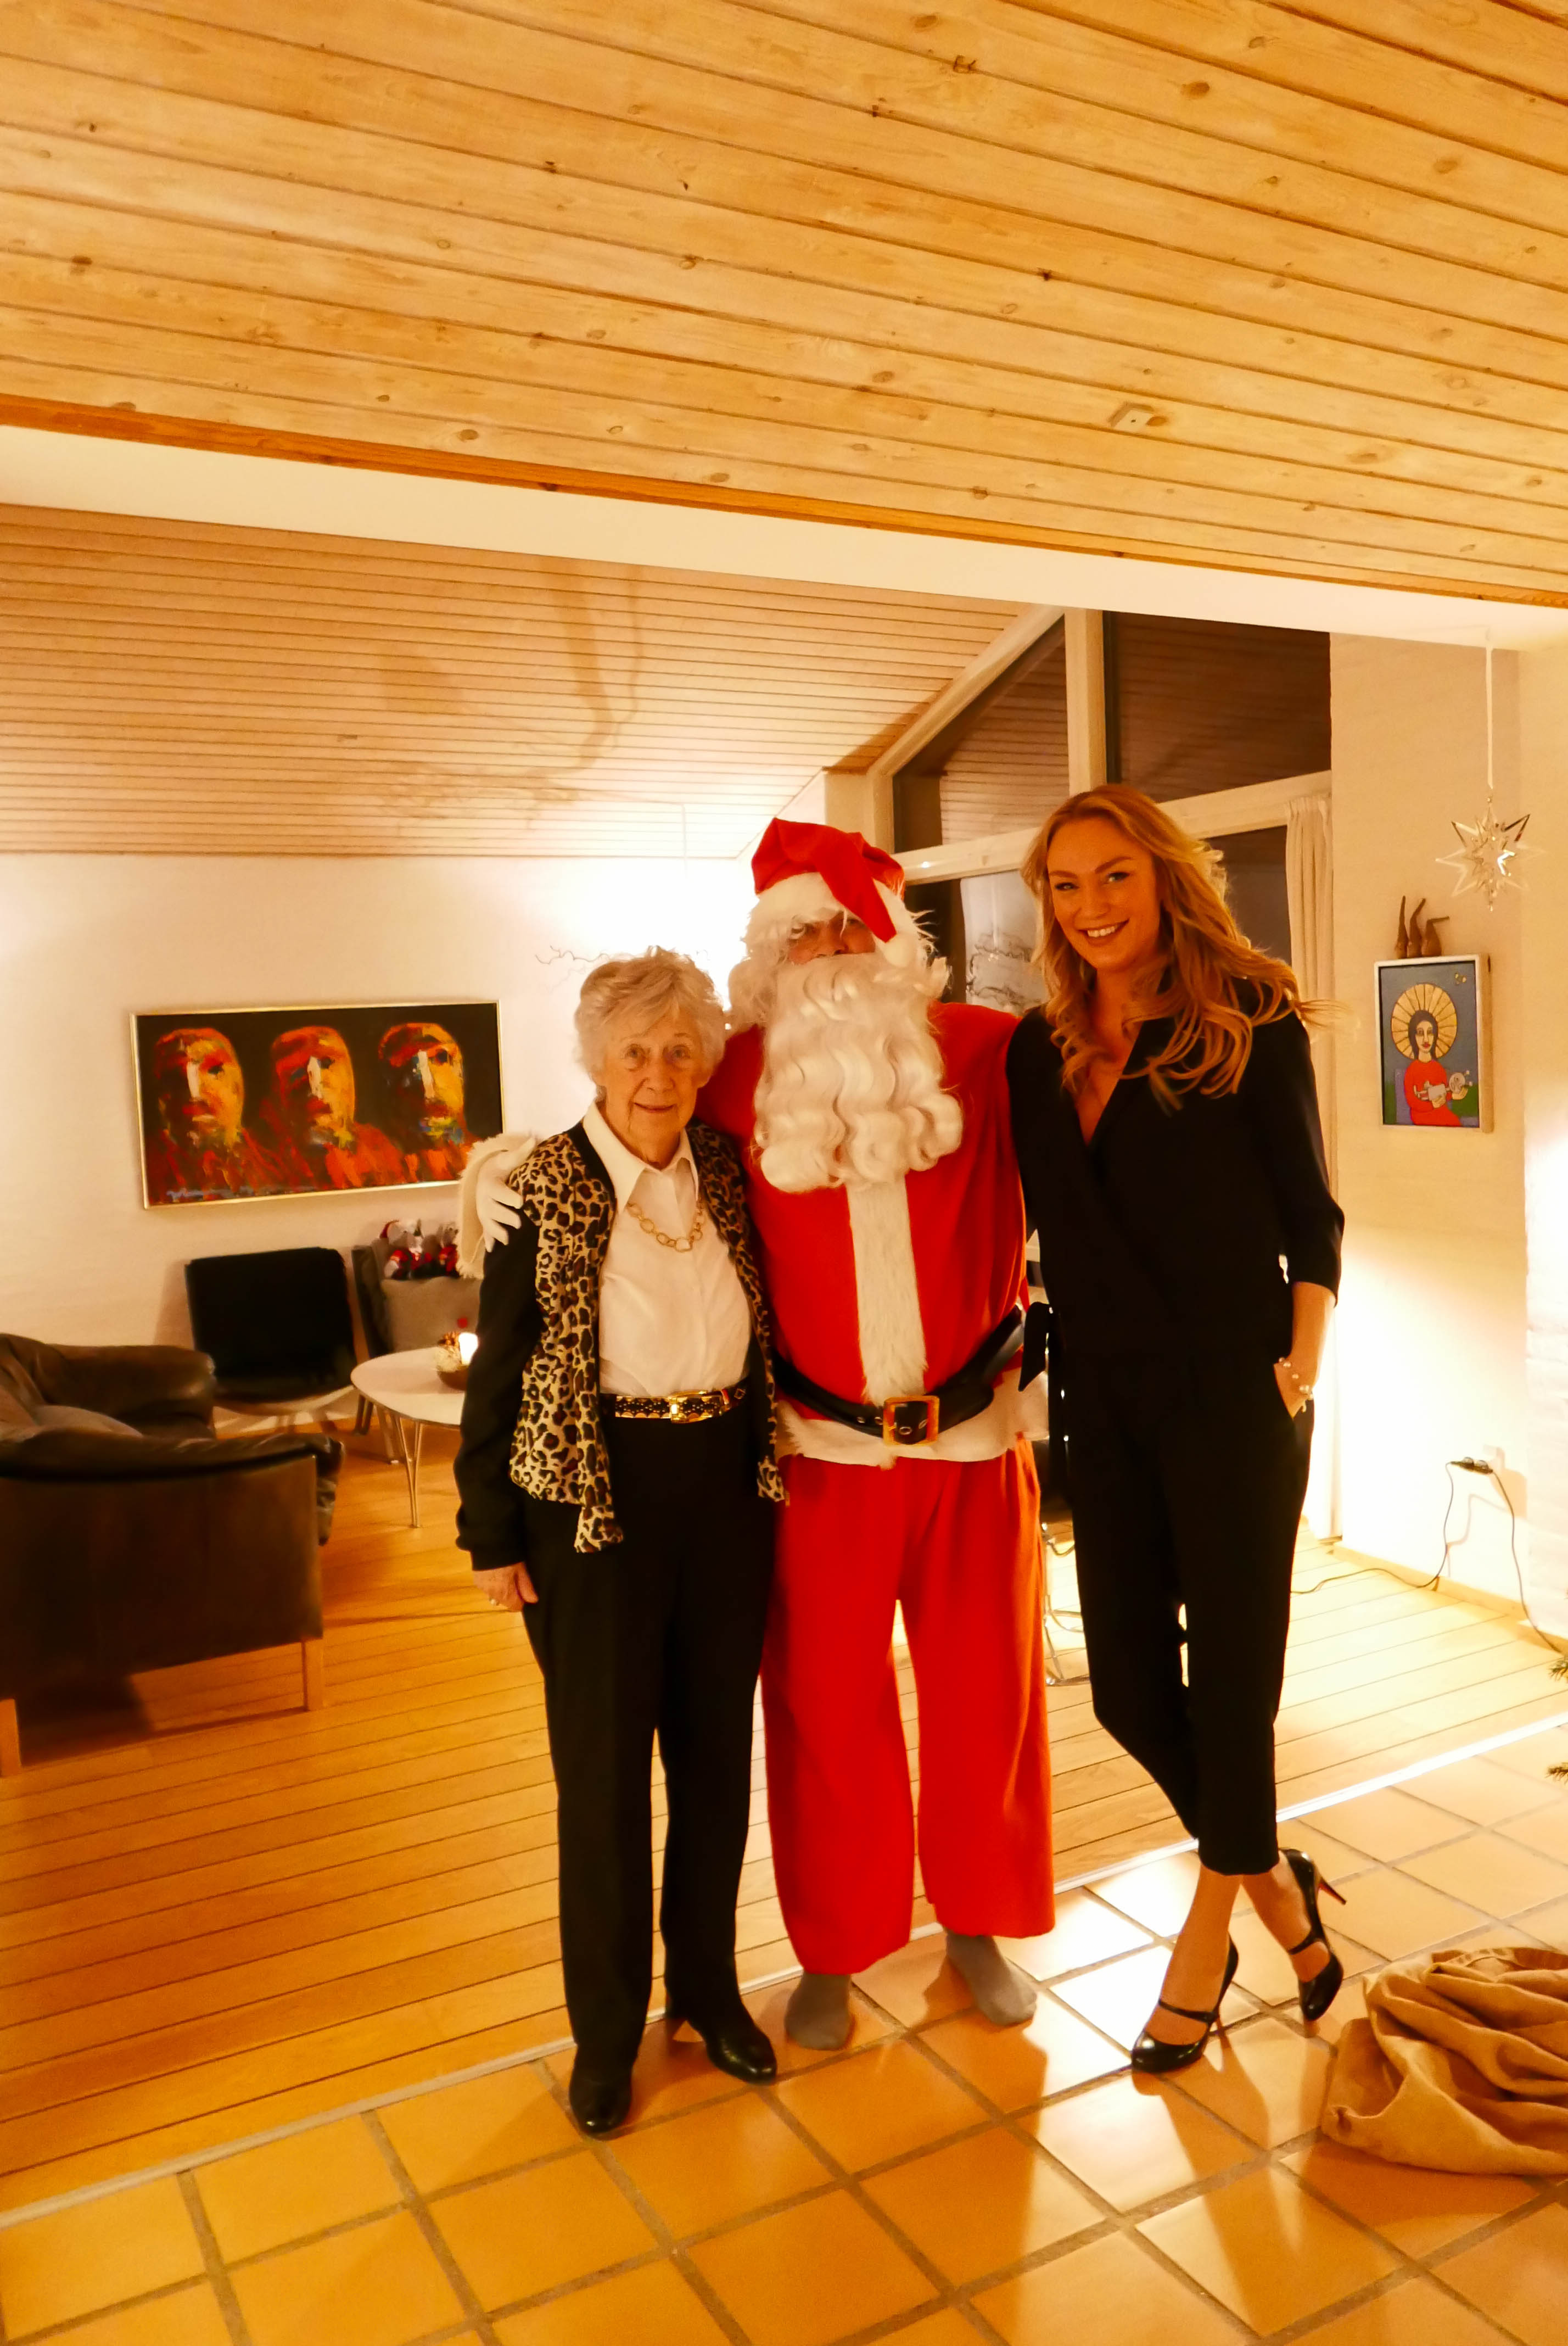 It’s all about love – my Christmas in Denmark